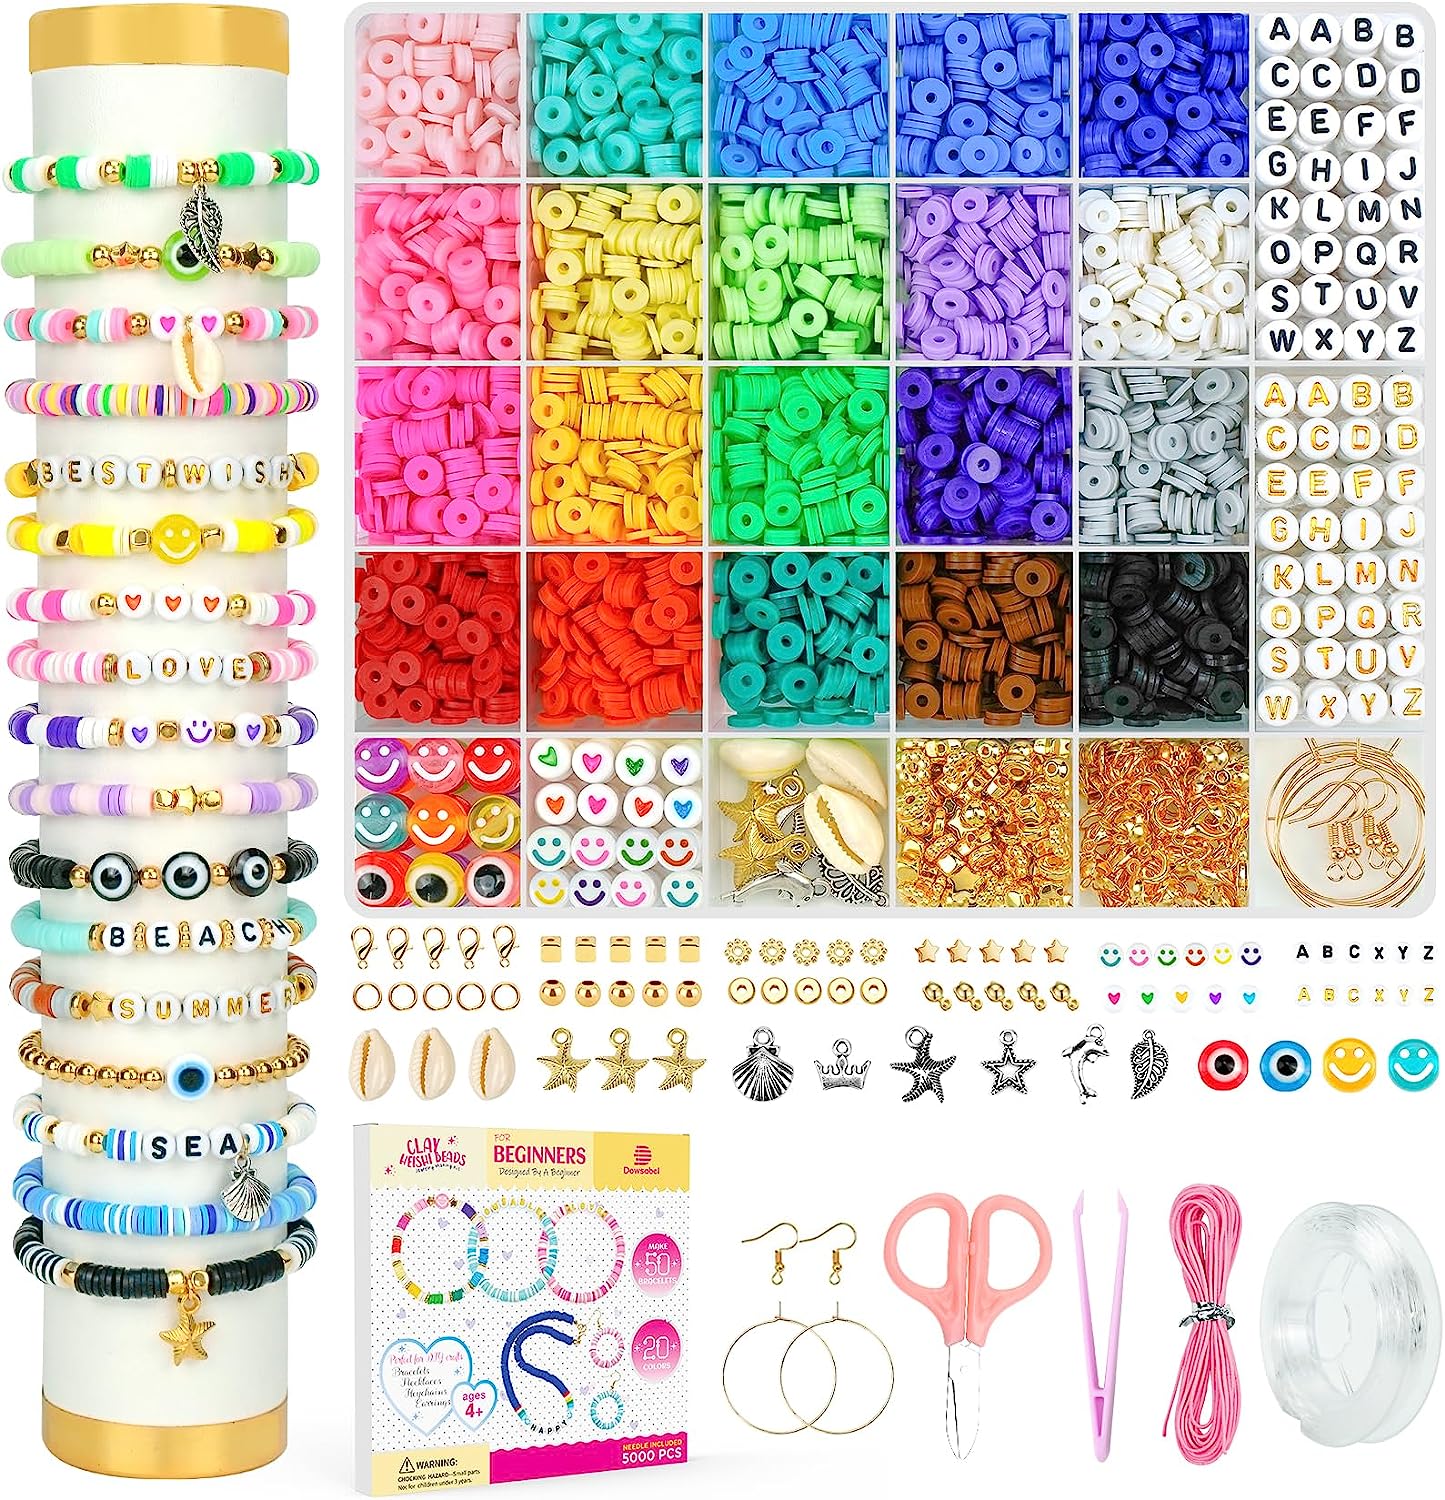 SEMATA Gold Beads for Bracelets Making Pearl Beads for Jewelry Making Kit  Star Beads Bracelet Charms Bracelet Making Kit Pearl Beads for Barcelets